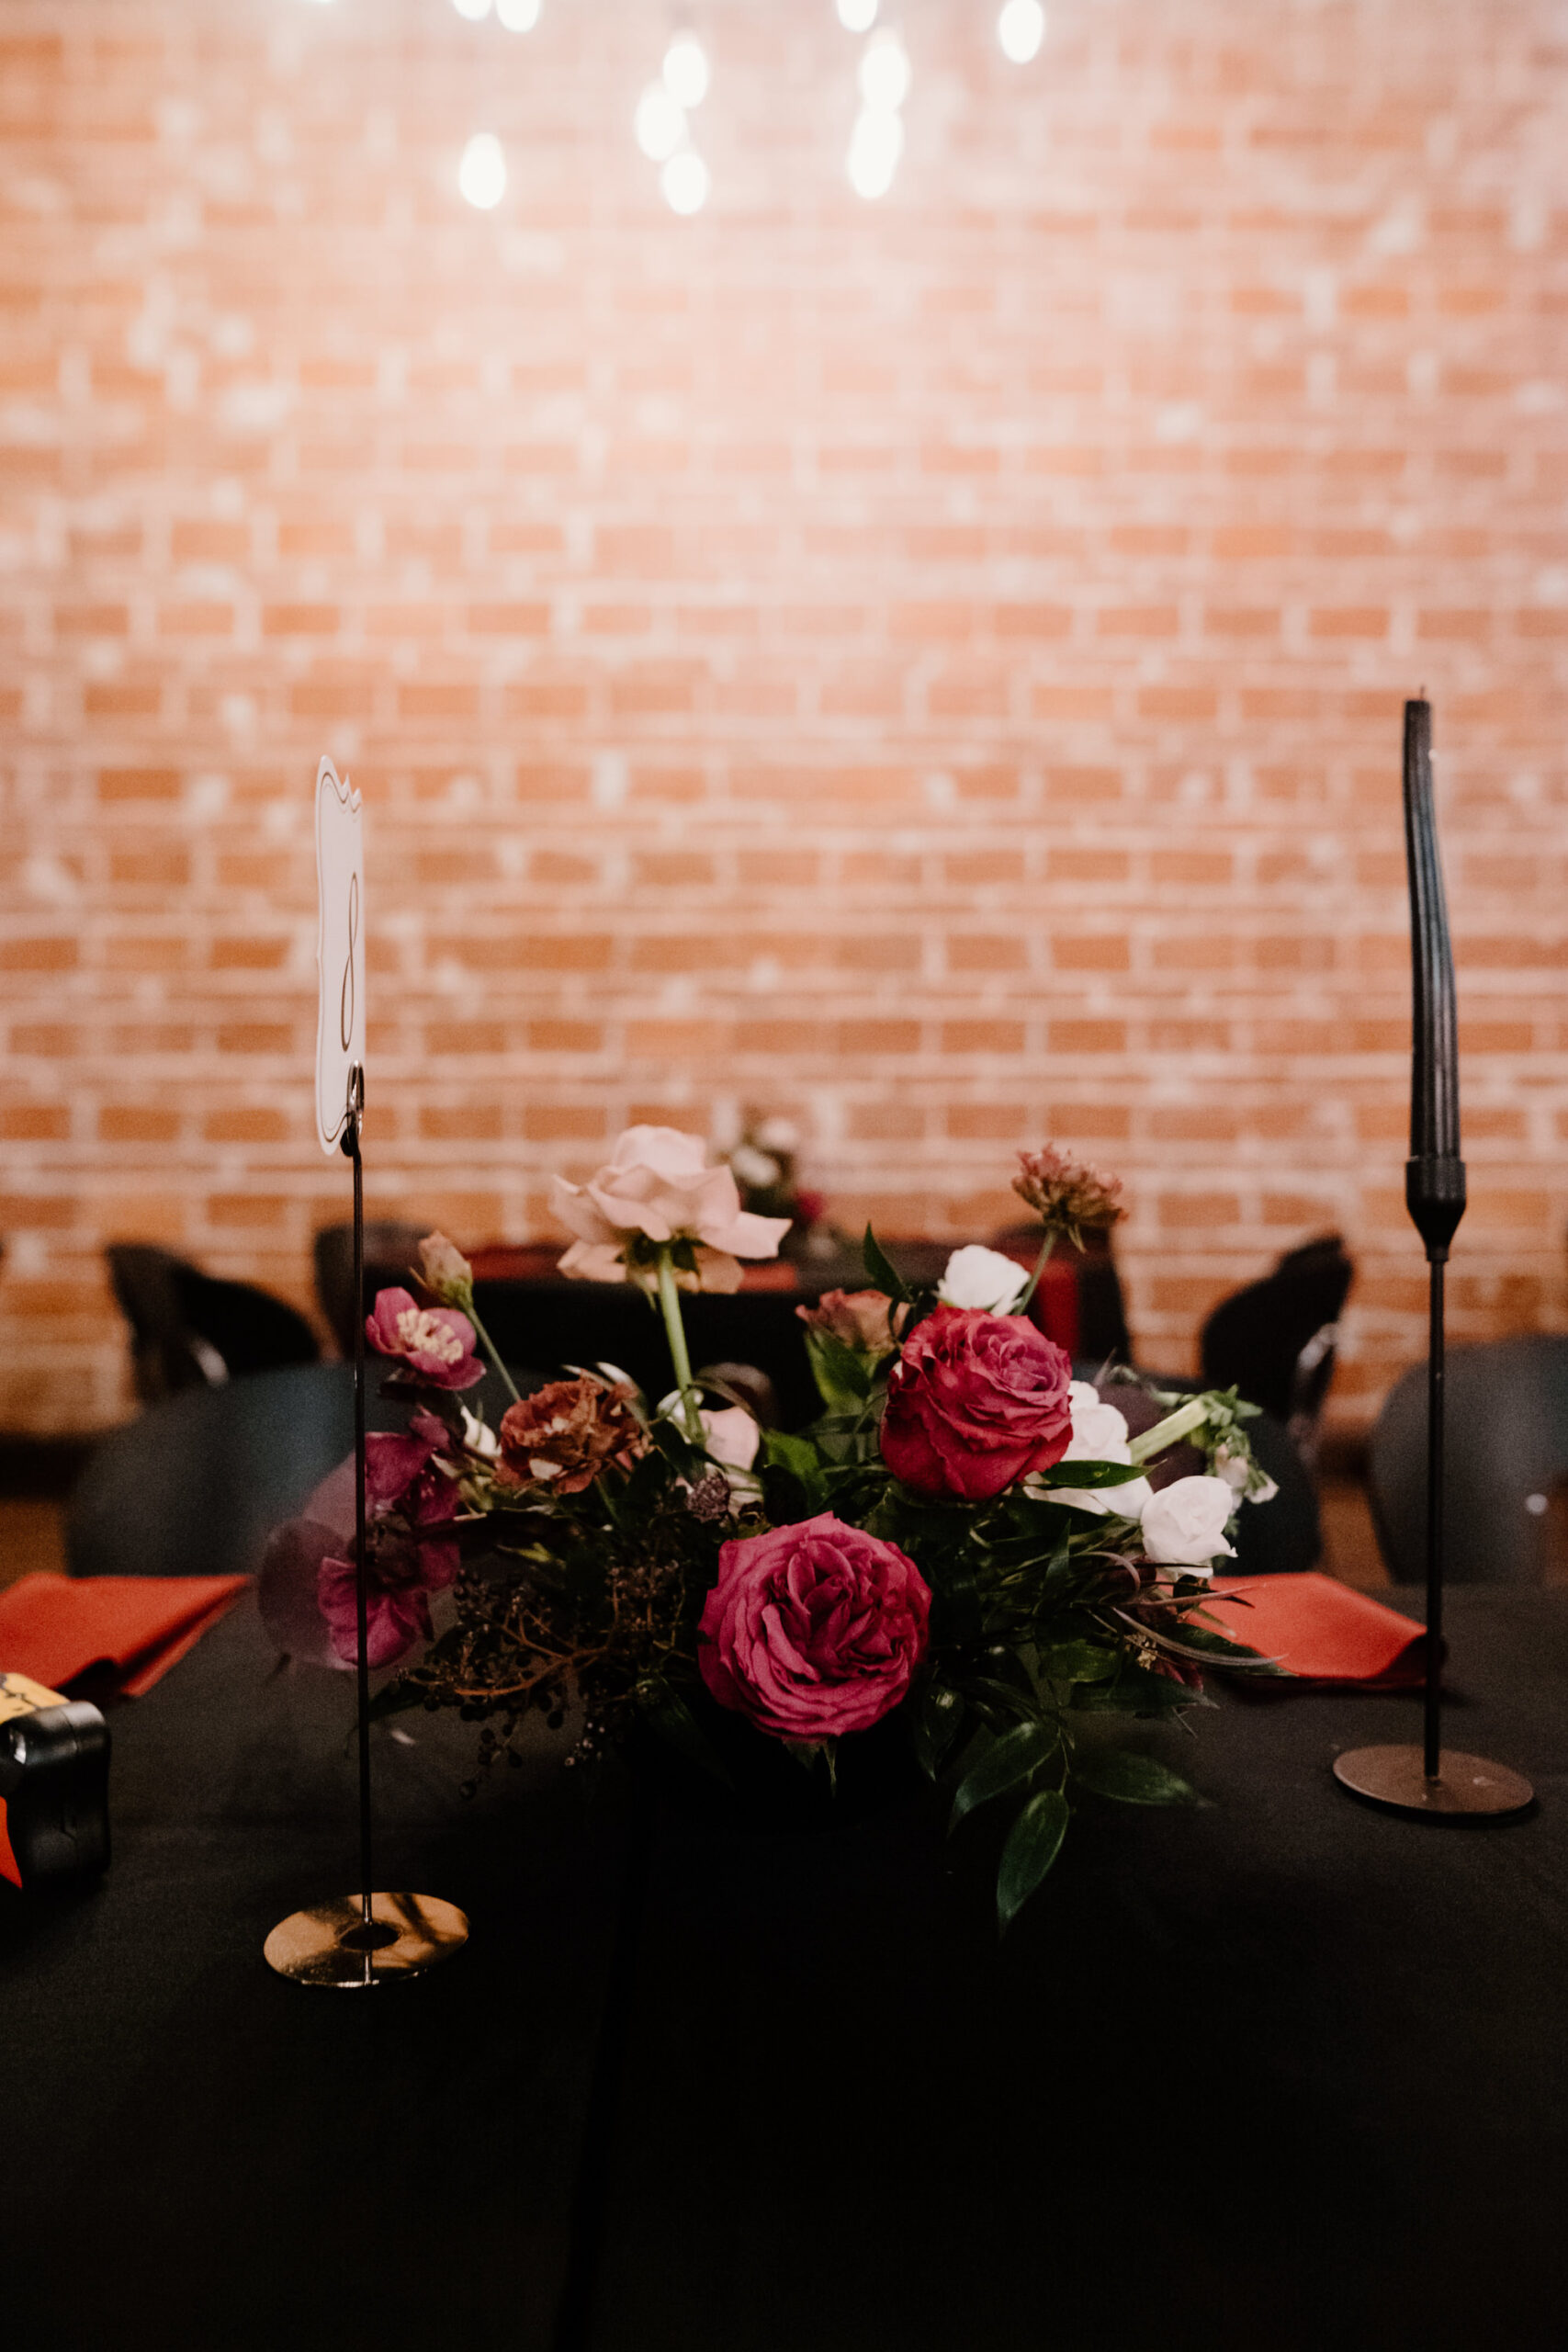 Dark and Moody Black and Pink Gothic Floral Wedding Reception Centerpiece Ideas